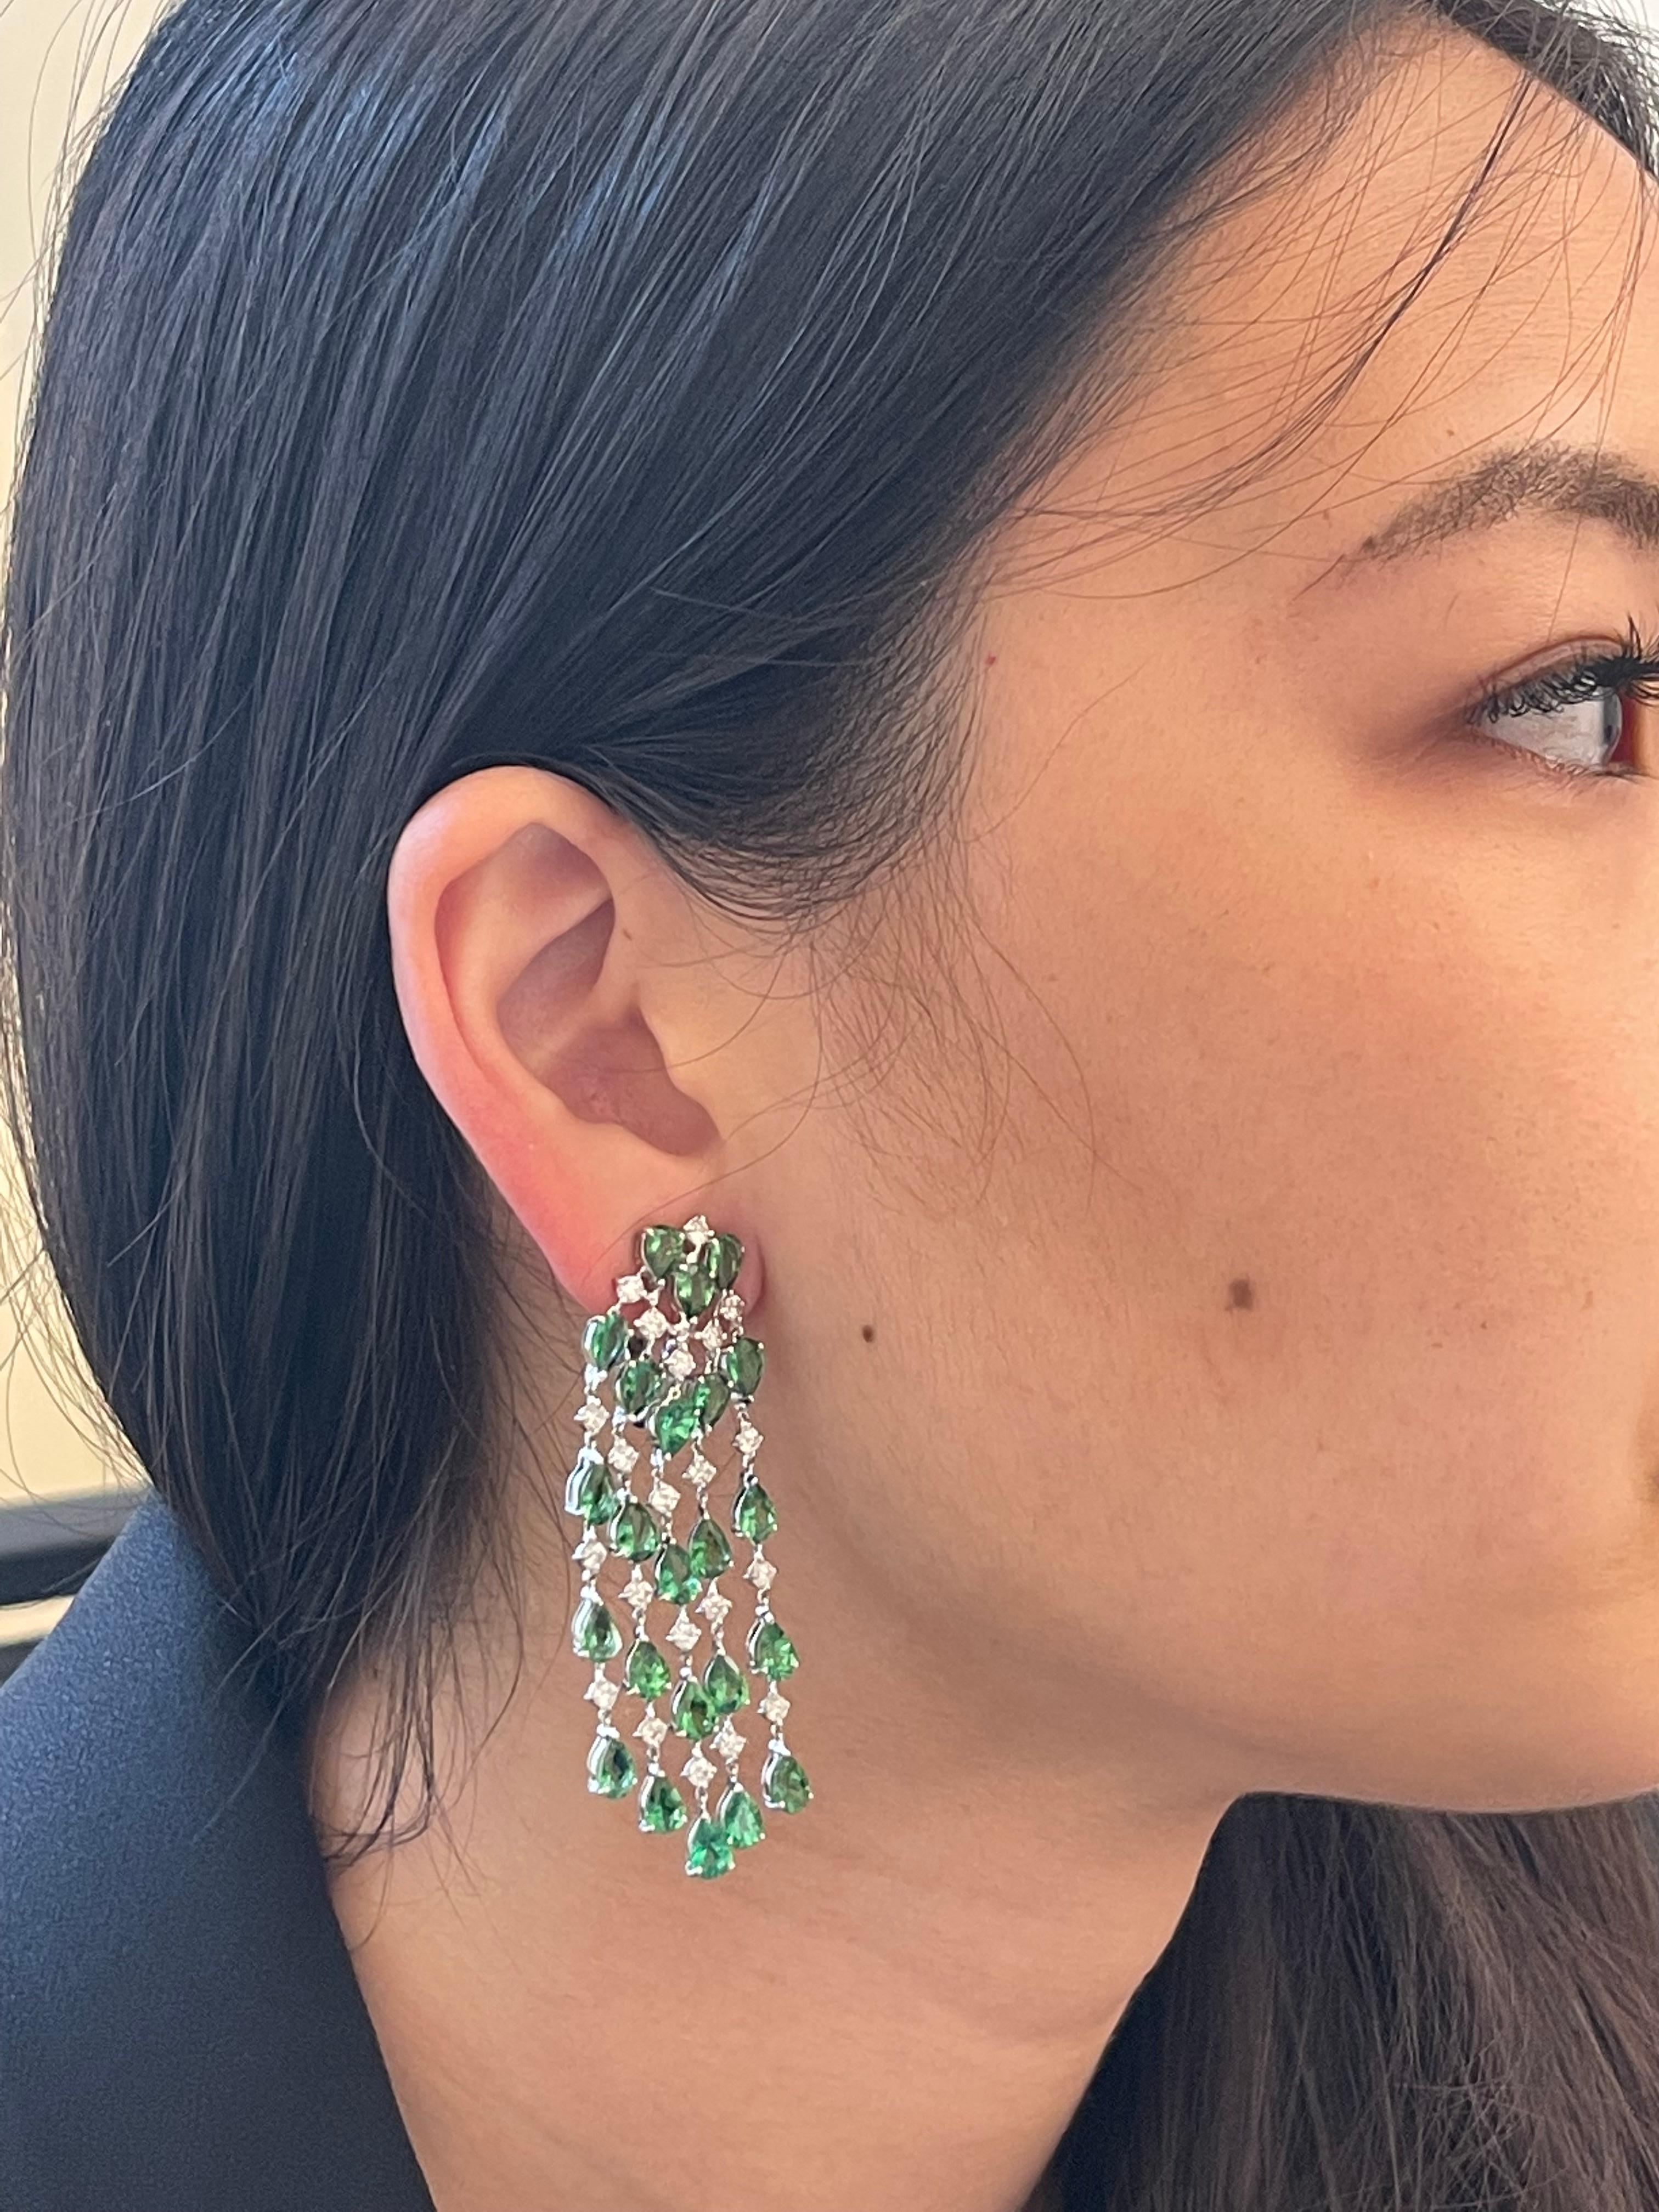 Earrings White Gold 18 K Gianni Lazzaro (Matching Rind Available)

Diamonds 42-2,79 ct HSI 
Tsavorite 42-18,30 ct.

With a heritage of ancient fine Swiss jewelry traditions, NATKINA is a Geneva-based jewelry brand that creates modern jewelry